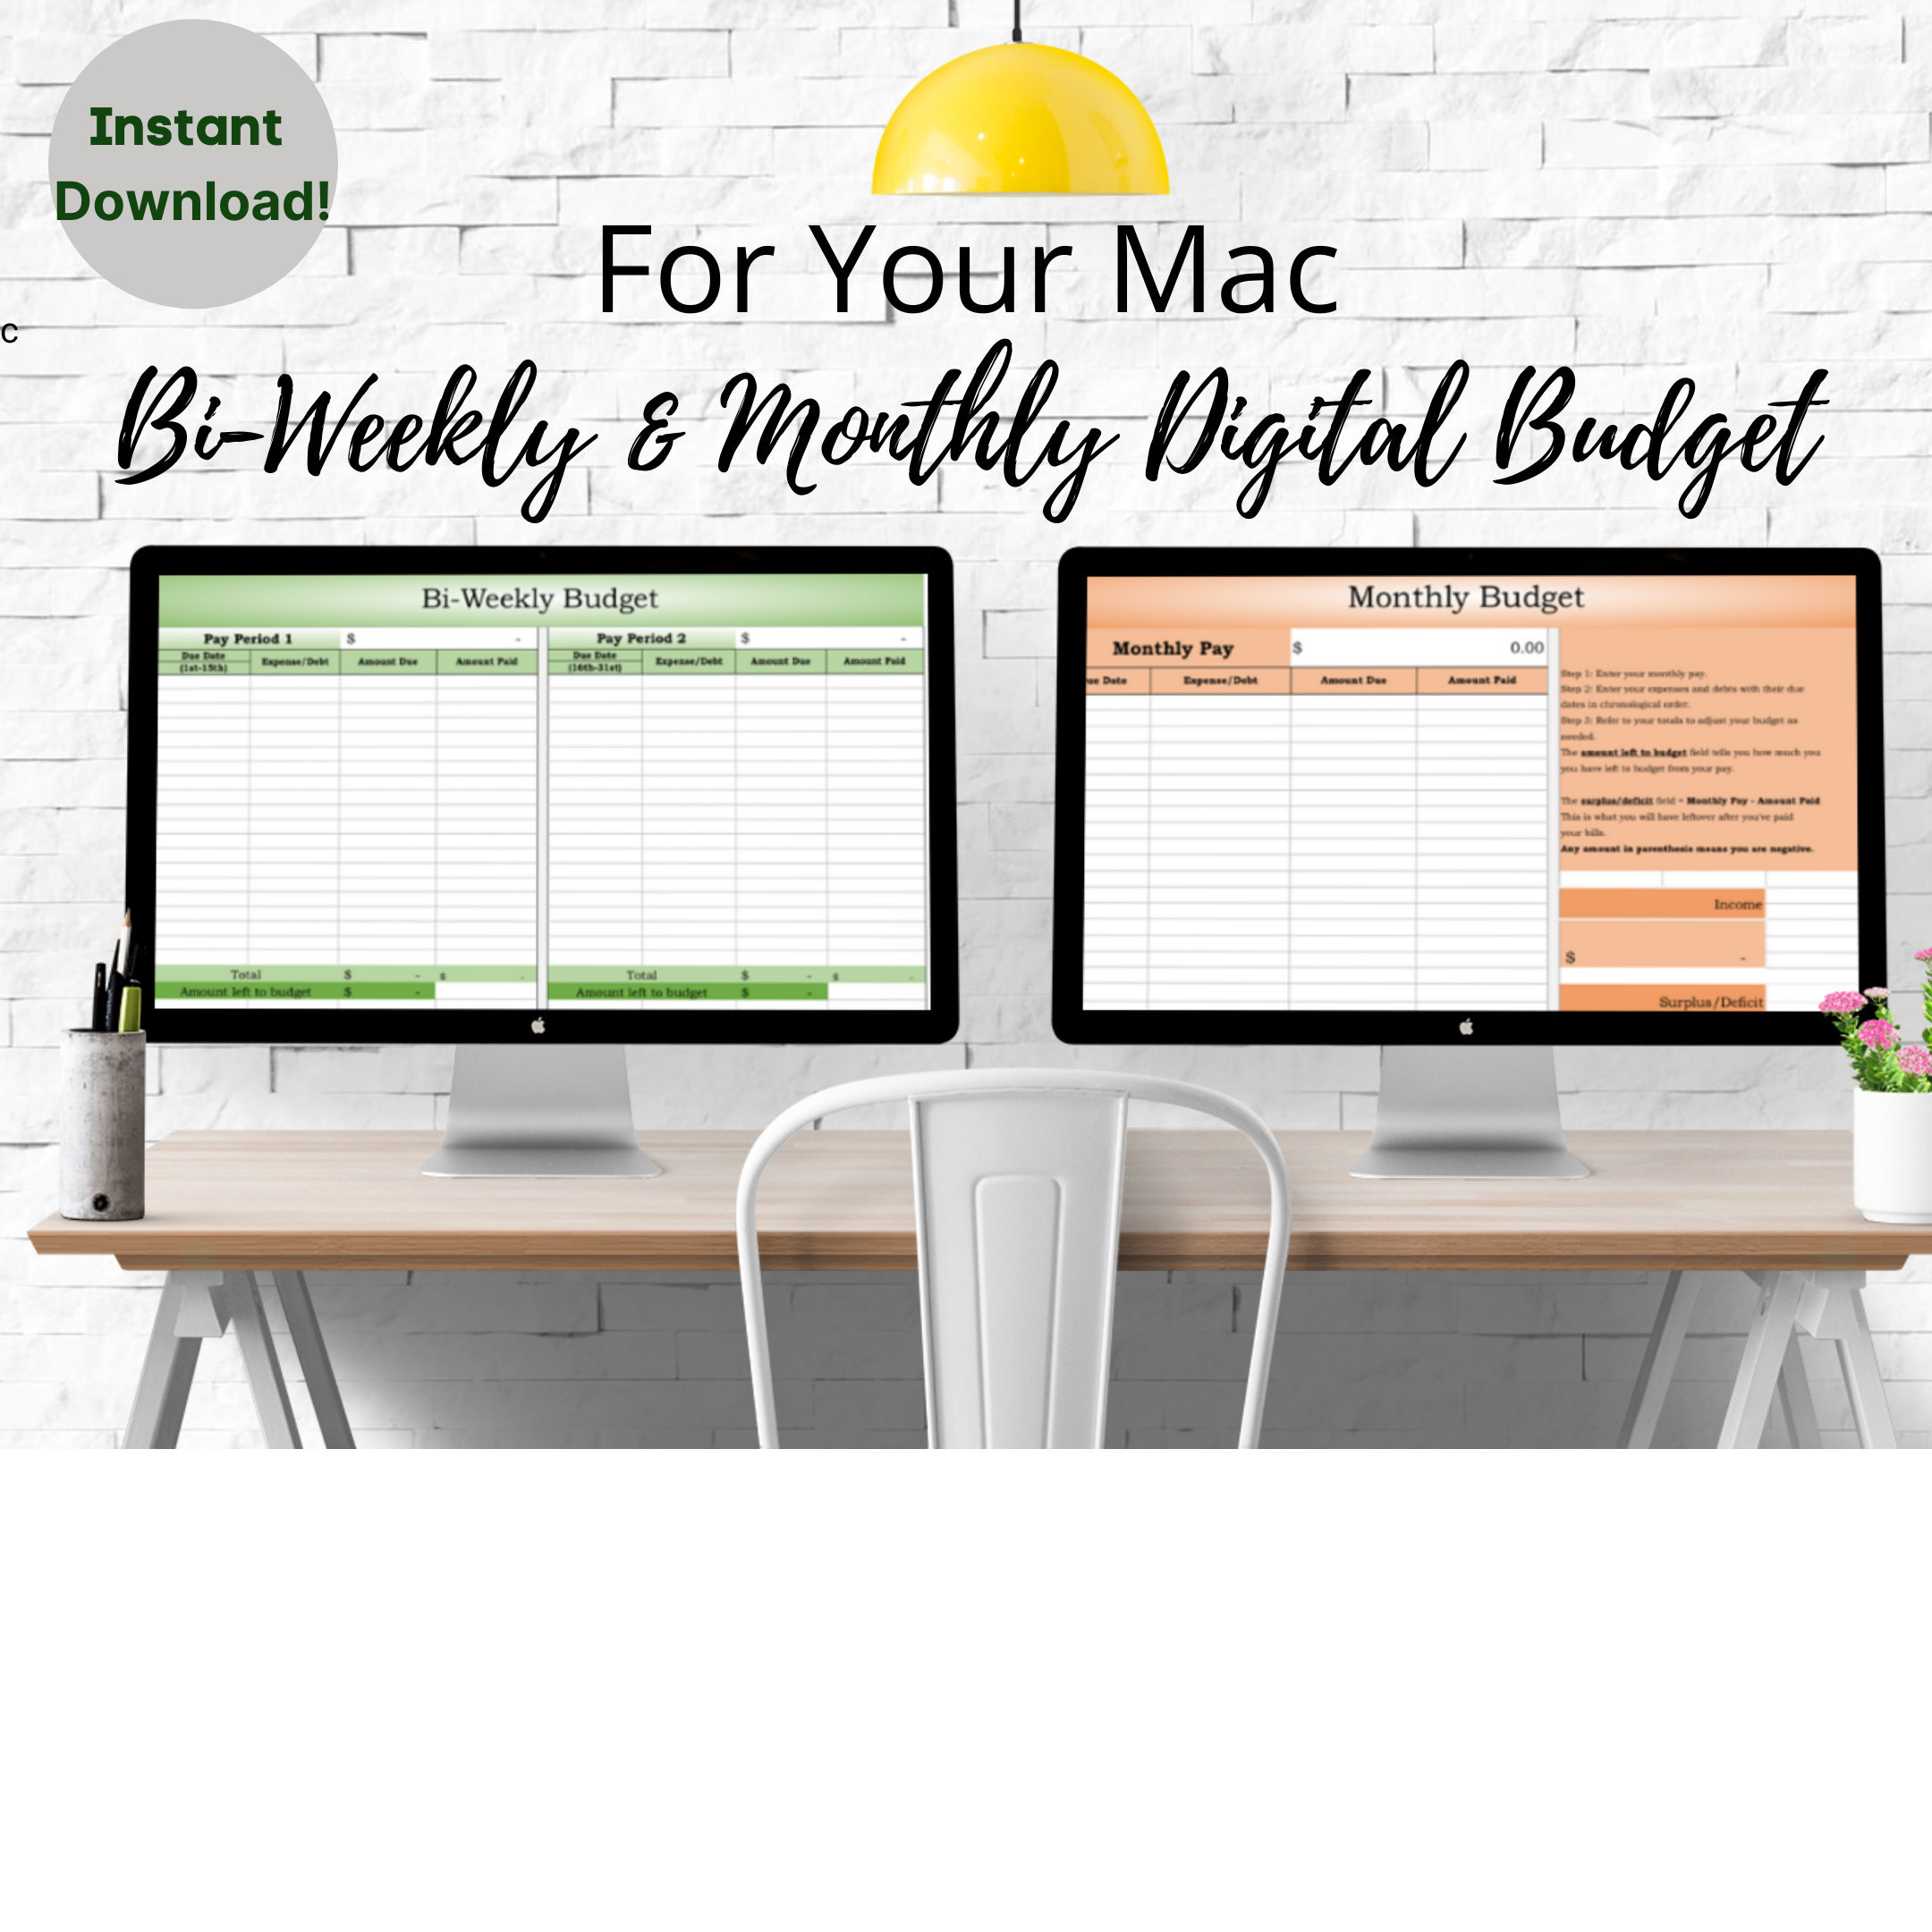 bi-weekly-monthly-budget-planner-for-mac-bill-tracker-etsy